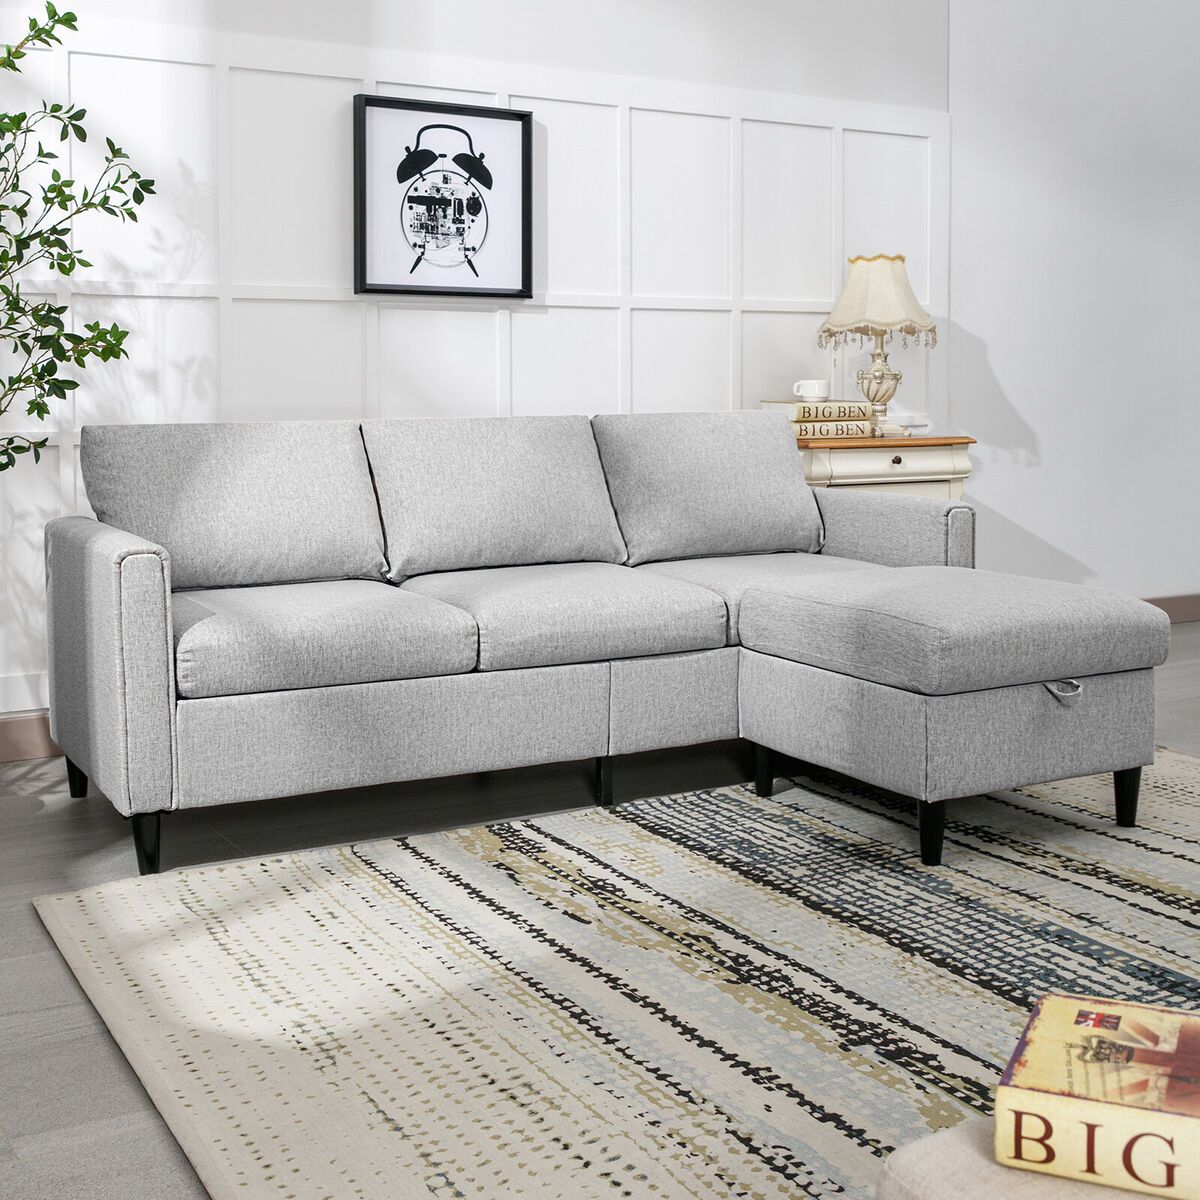 Convertible Sectional Sofa Couch, 77"l Shaped Sofa With Storage Ottoman |  Ebay In Convertible L Shaped Sectional Sofas (Photo 2 of 24)